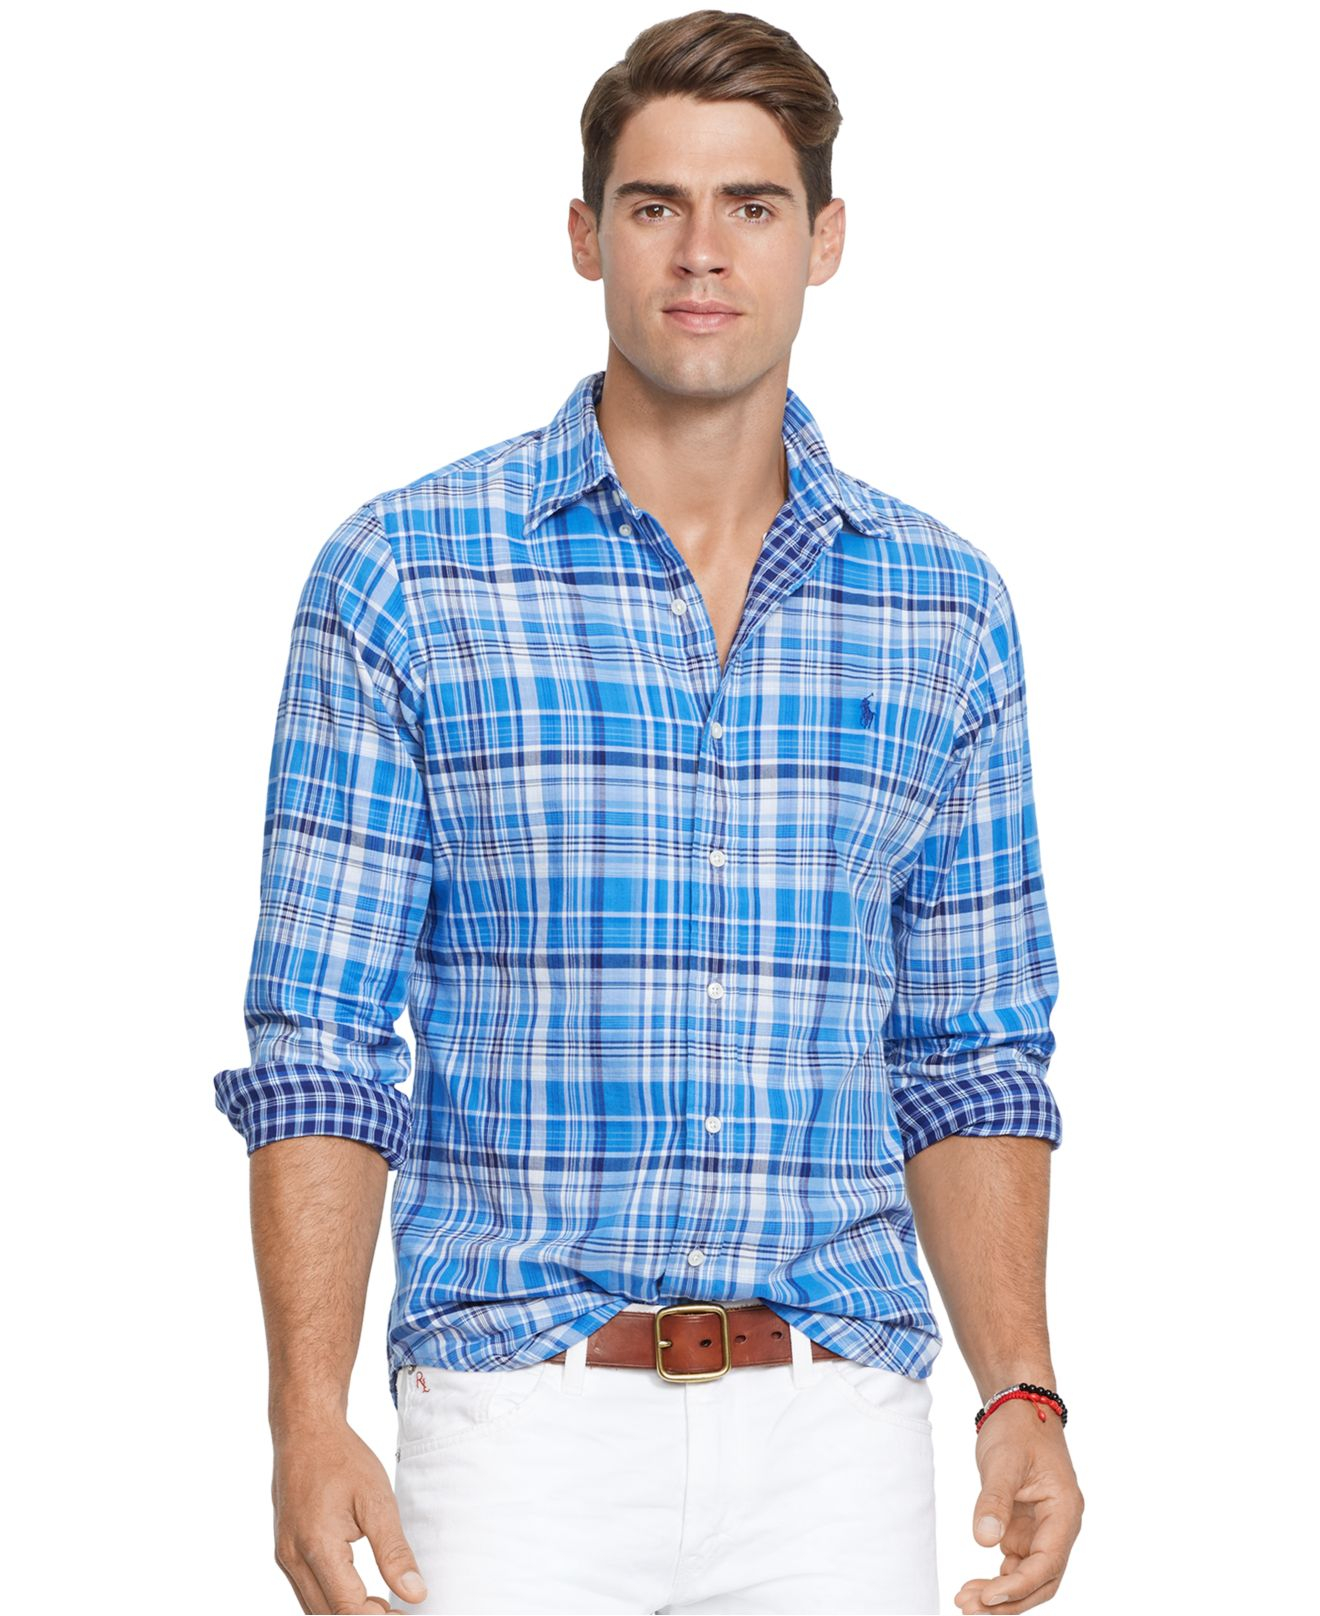 Lyst - Polo Ralph Lauren Double-Faced Plaid Oxford Shirt in Blue for Men